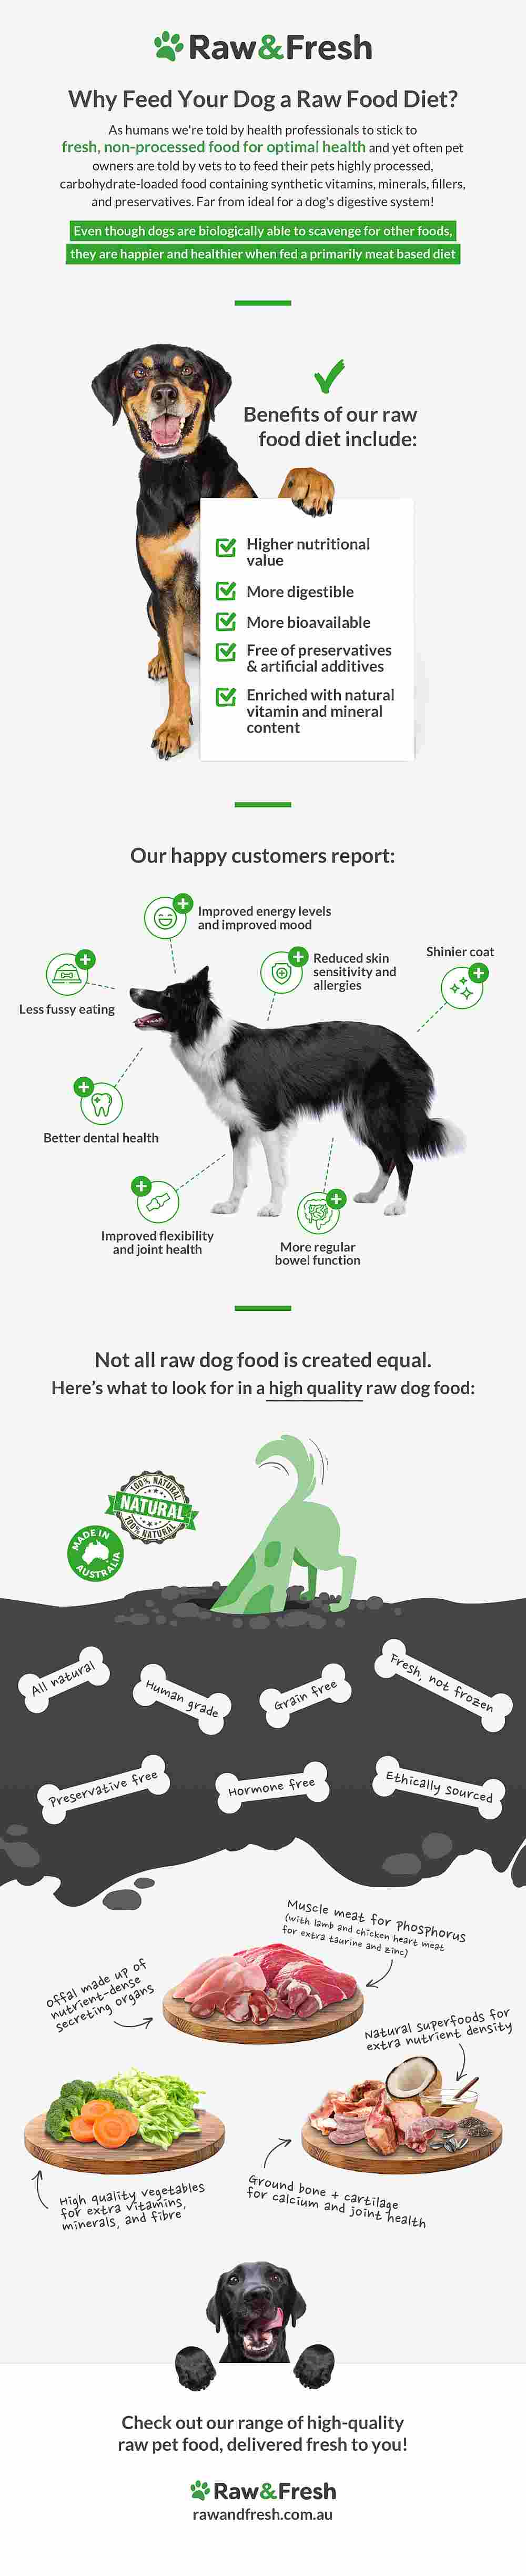 Why Feed Your Dog A Raw Food Diet - Raw and Fresh